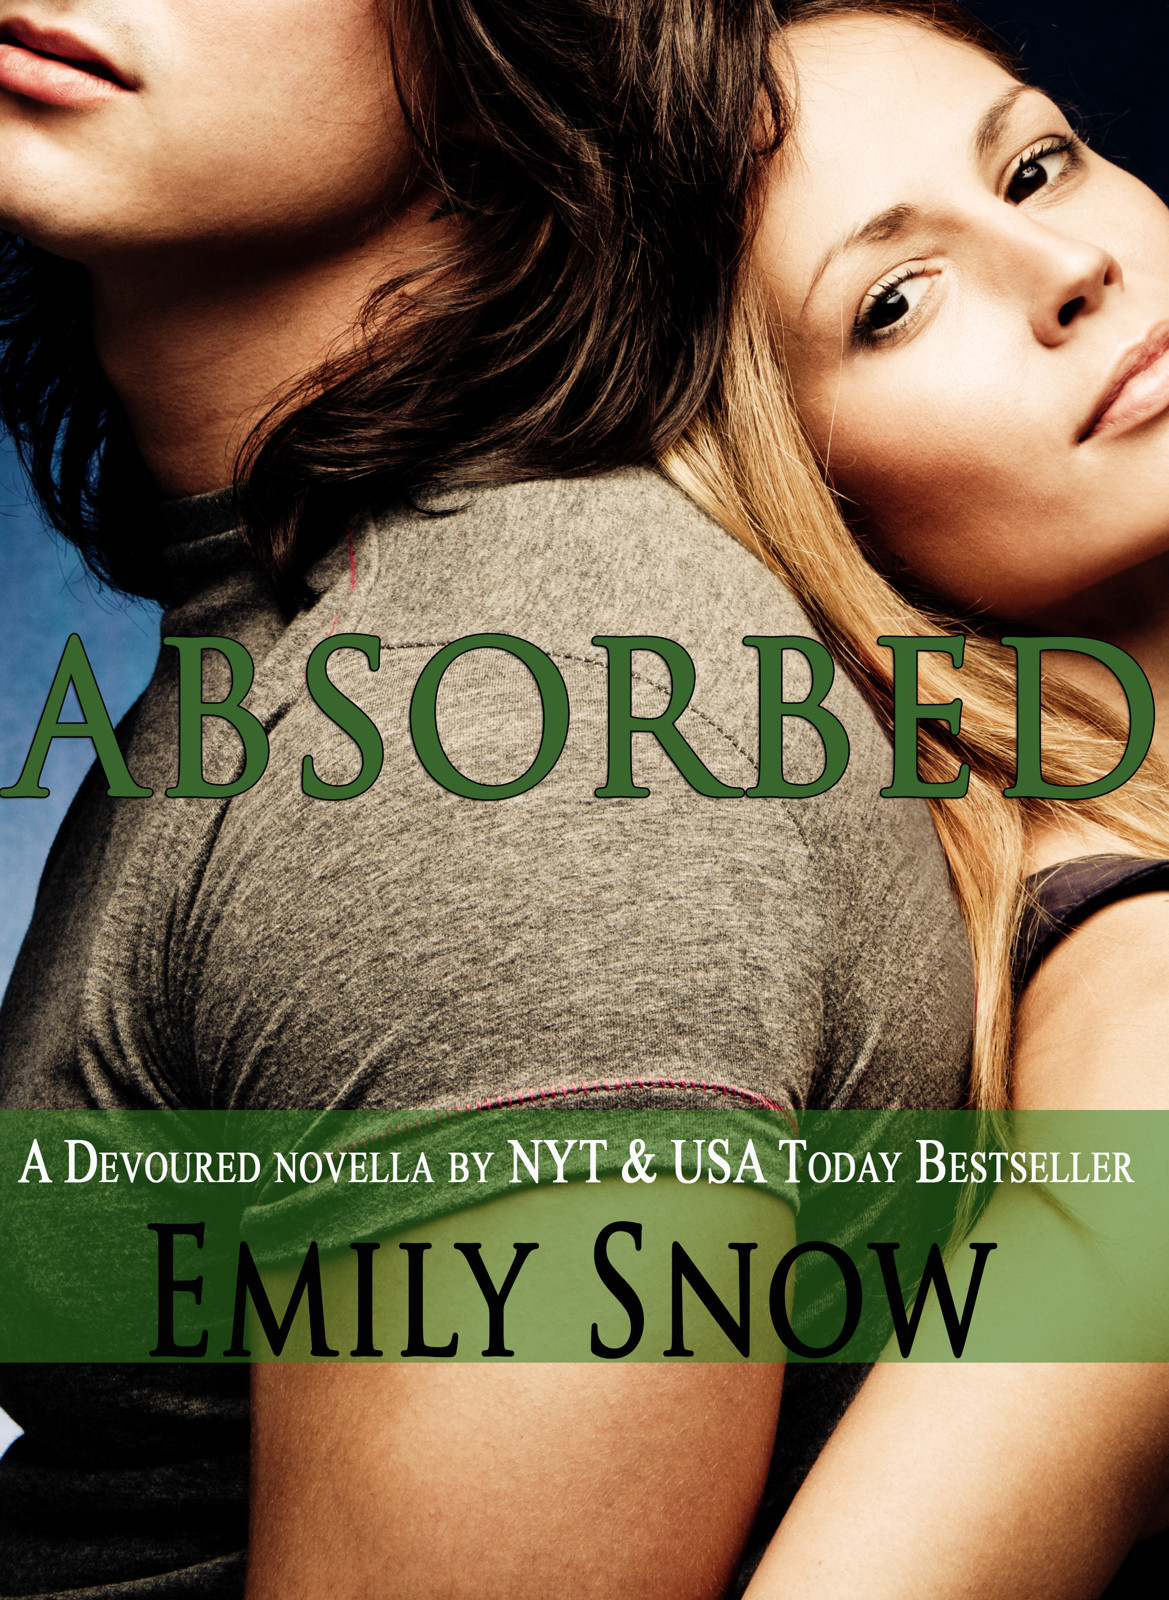 Absorbed by Emily Snow